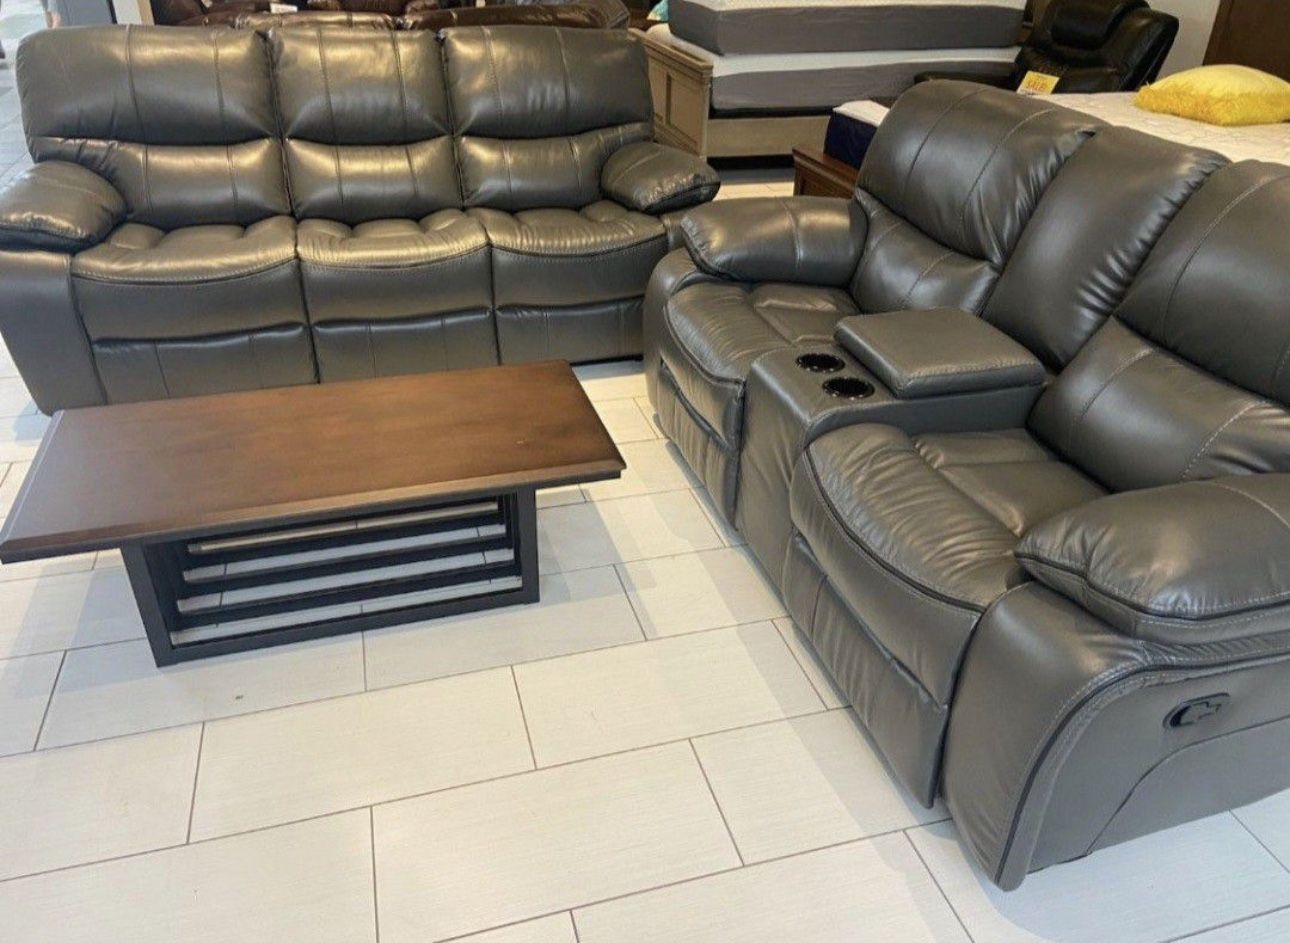 BEAUTIFUL NEW MADRID RECLINING SOFA AND LOVESEAT SET ON SALE ONLY $899. IN STOCK SAME DAY DELIVERY 🚚 EASY FINANCING 